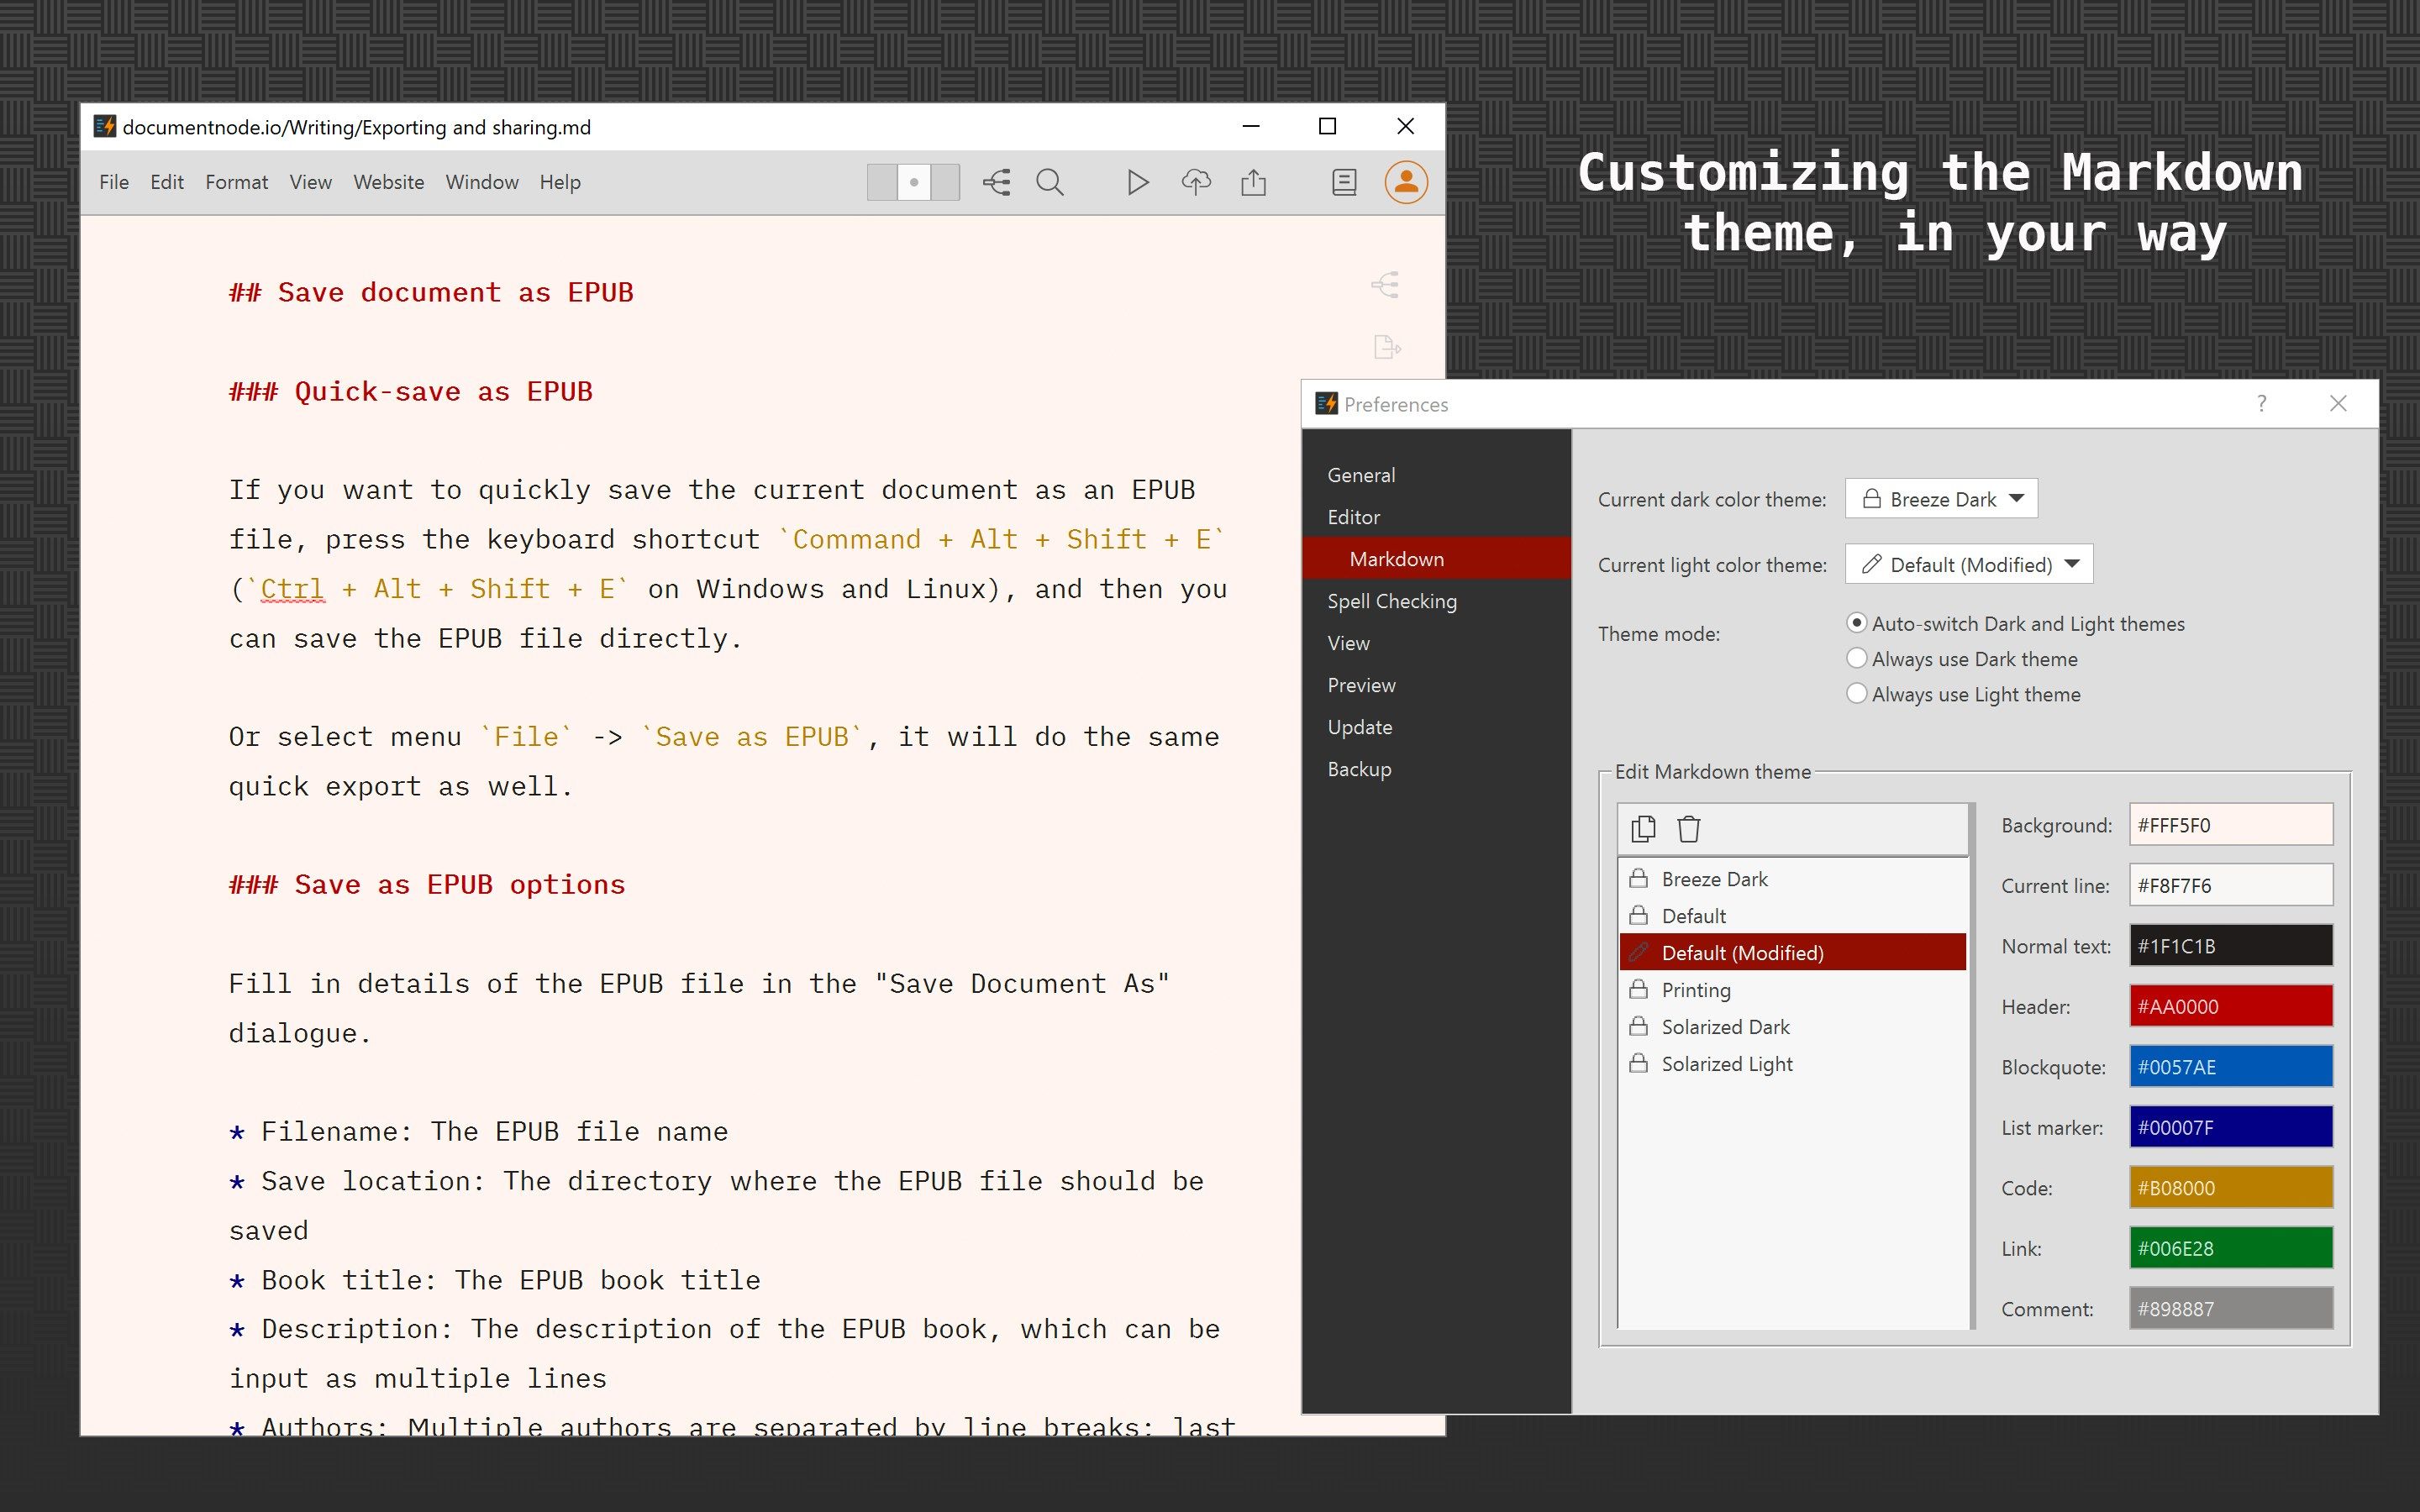 Customizing the Markdown theme, in your way